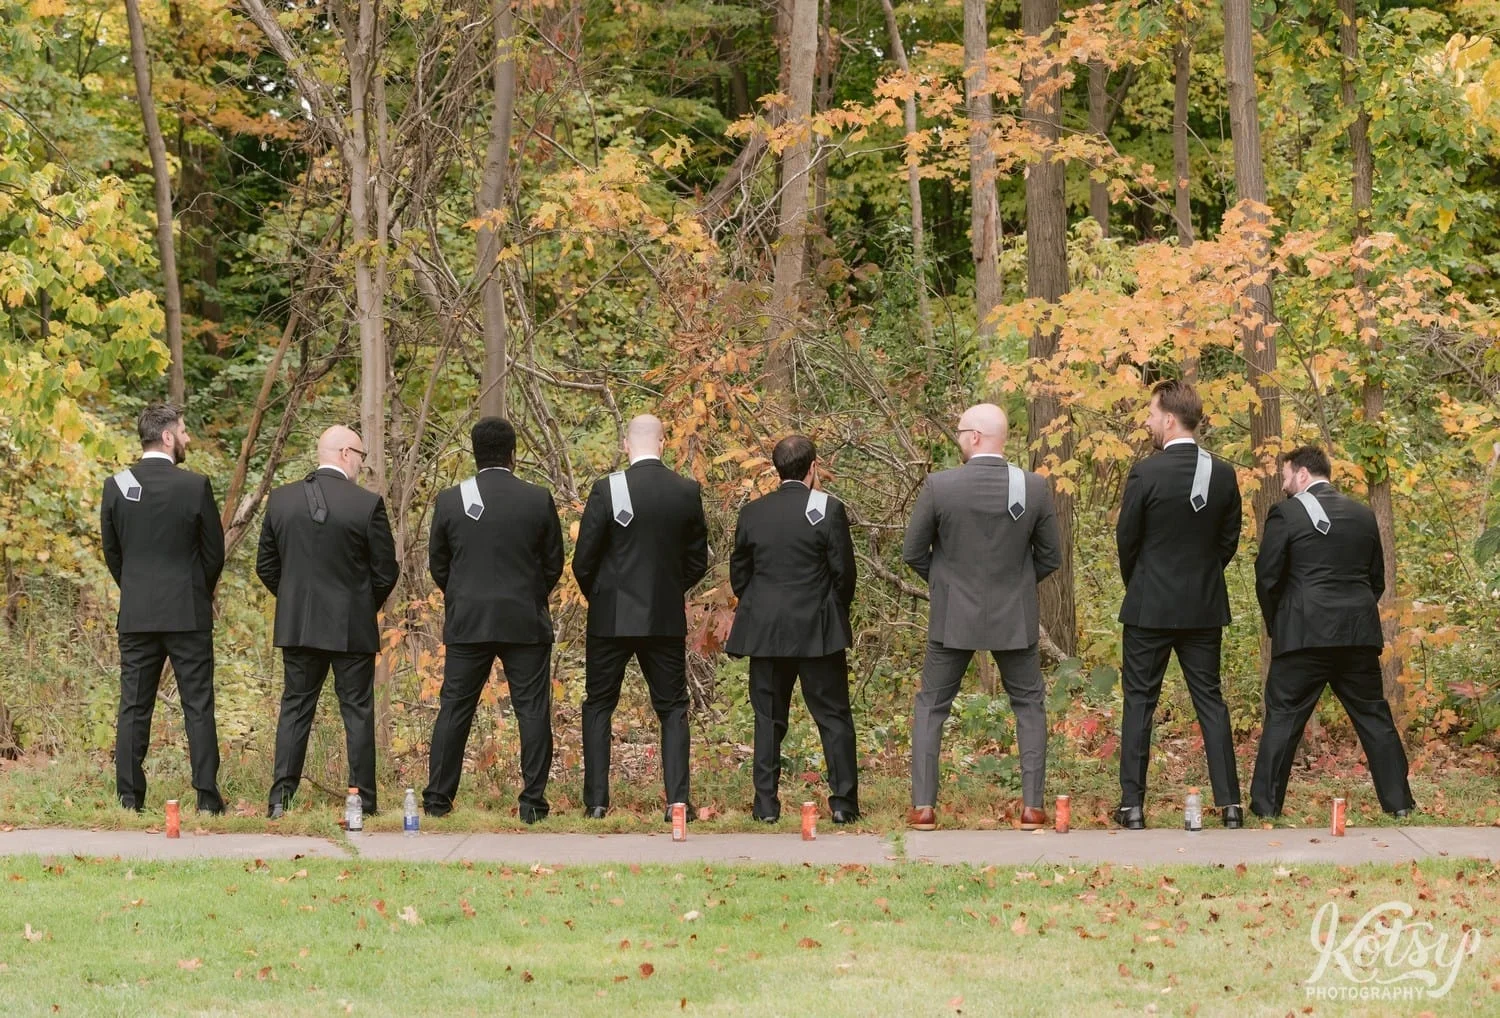 A groom and his 7 groomsmen stand in a line facing away from the camera and ties over their shoulder mimicking Urinating on the grass at West Deane Park in Toronto, Canada